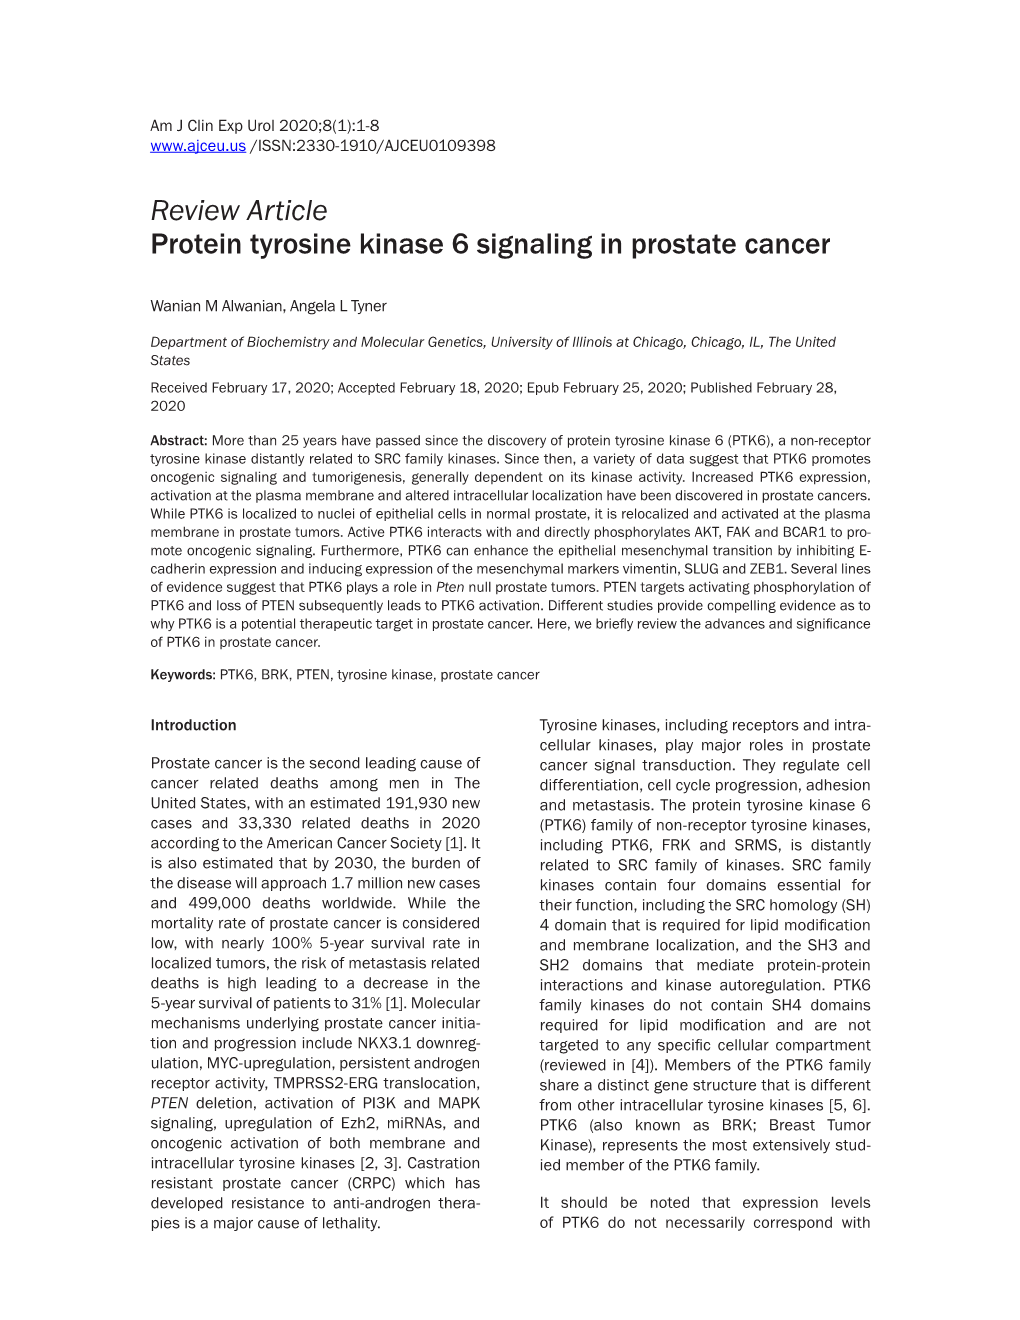 Review Article Protein Tyrosine Kinase 6 Signaling in Prostate Cancer